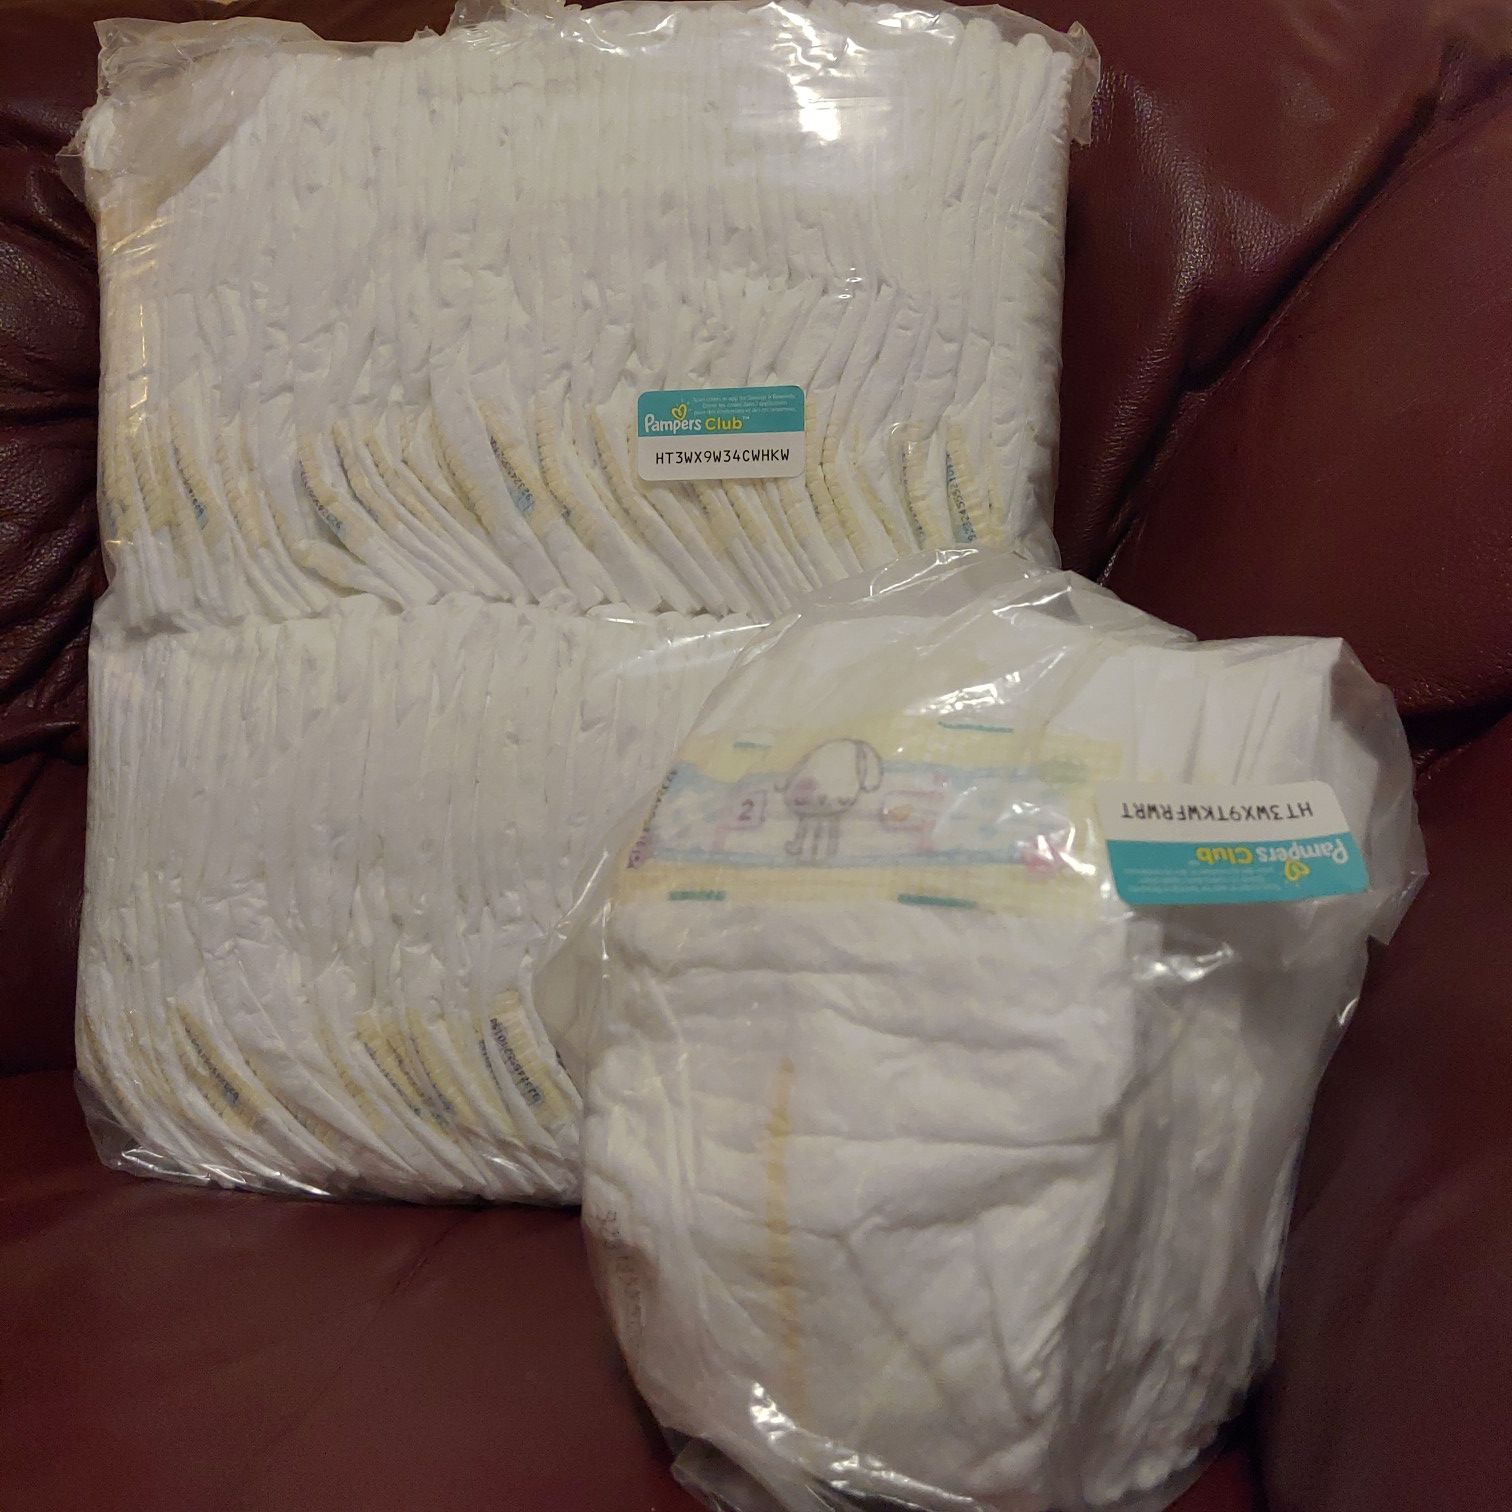 84 count Pampers Size 2 Diapers